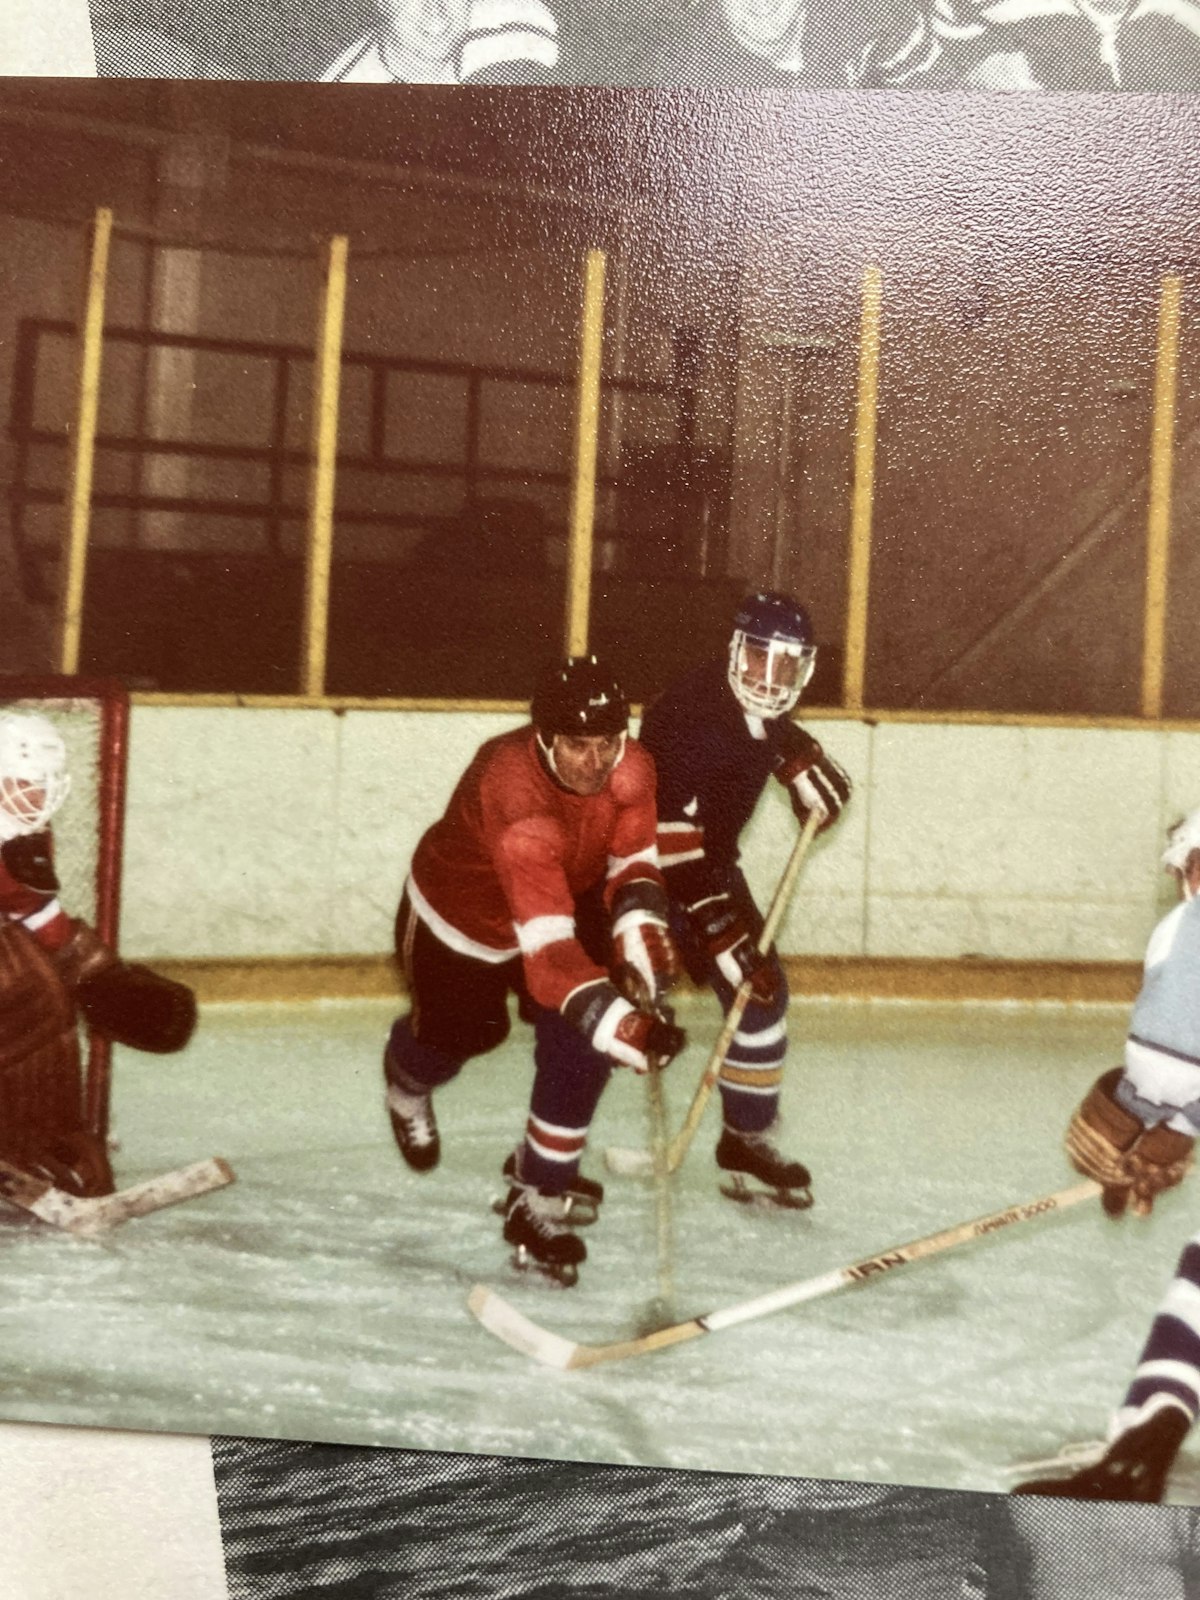 Msgr. Moloney (in red) played ice hockey during his younger days, suiting up as a right winger.